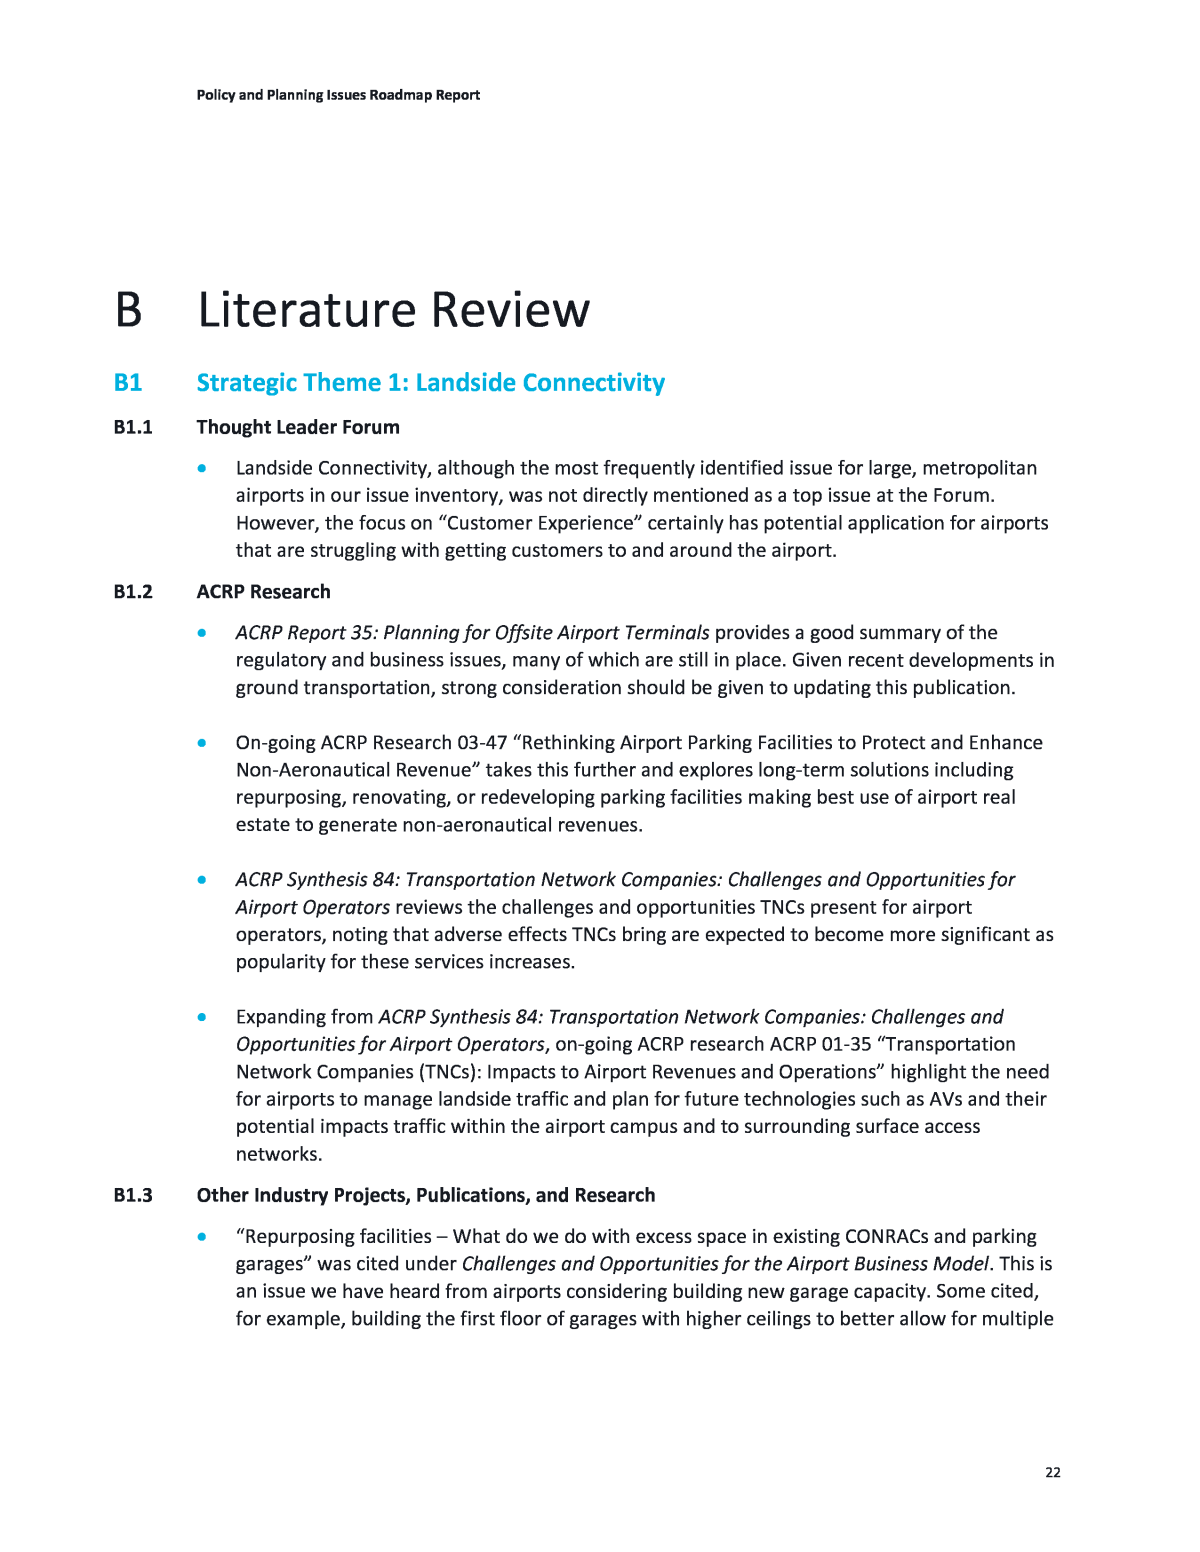 Appendix B. Literature Review | Policy and Planning Issues ...